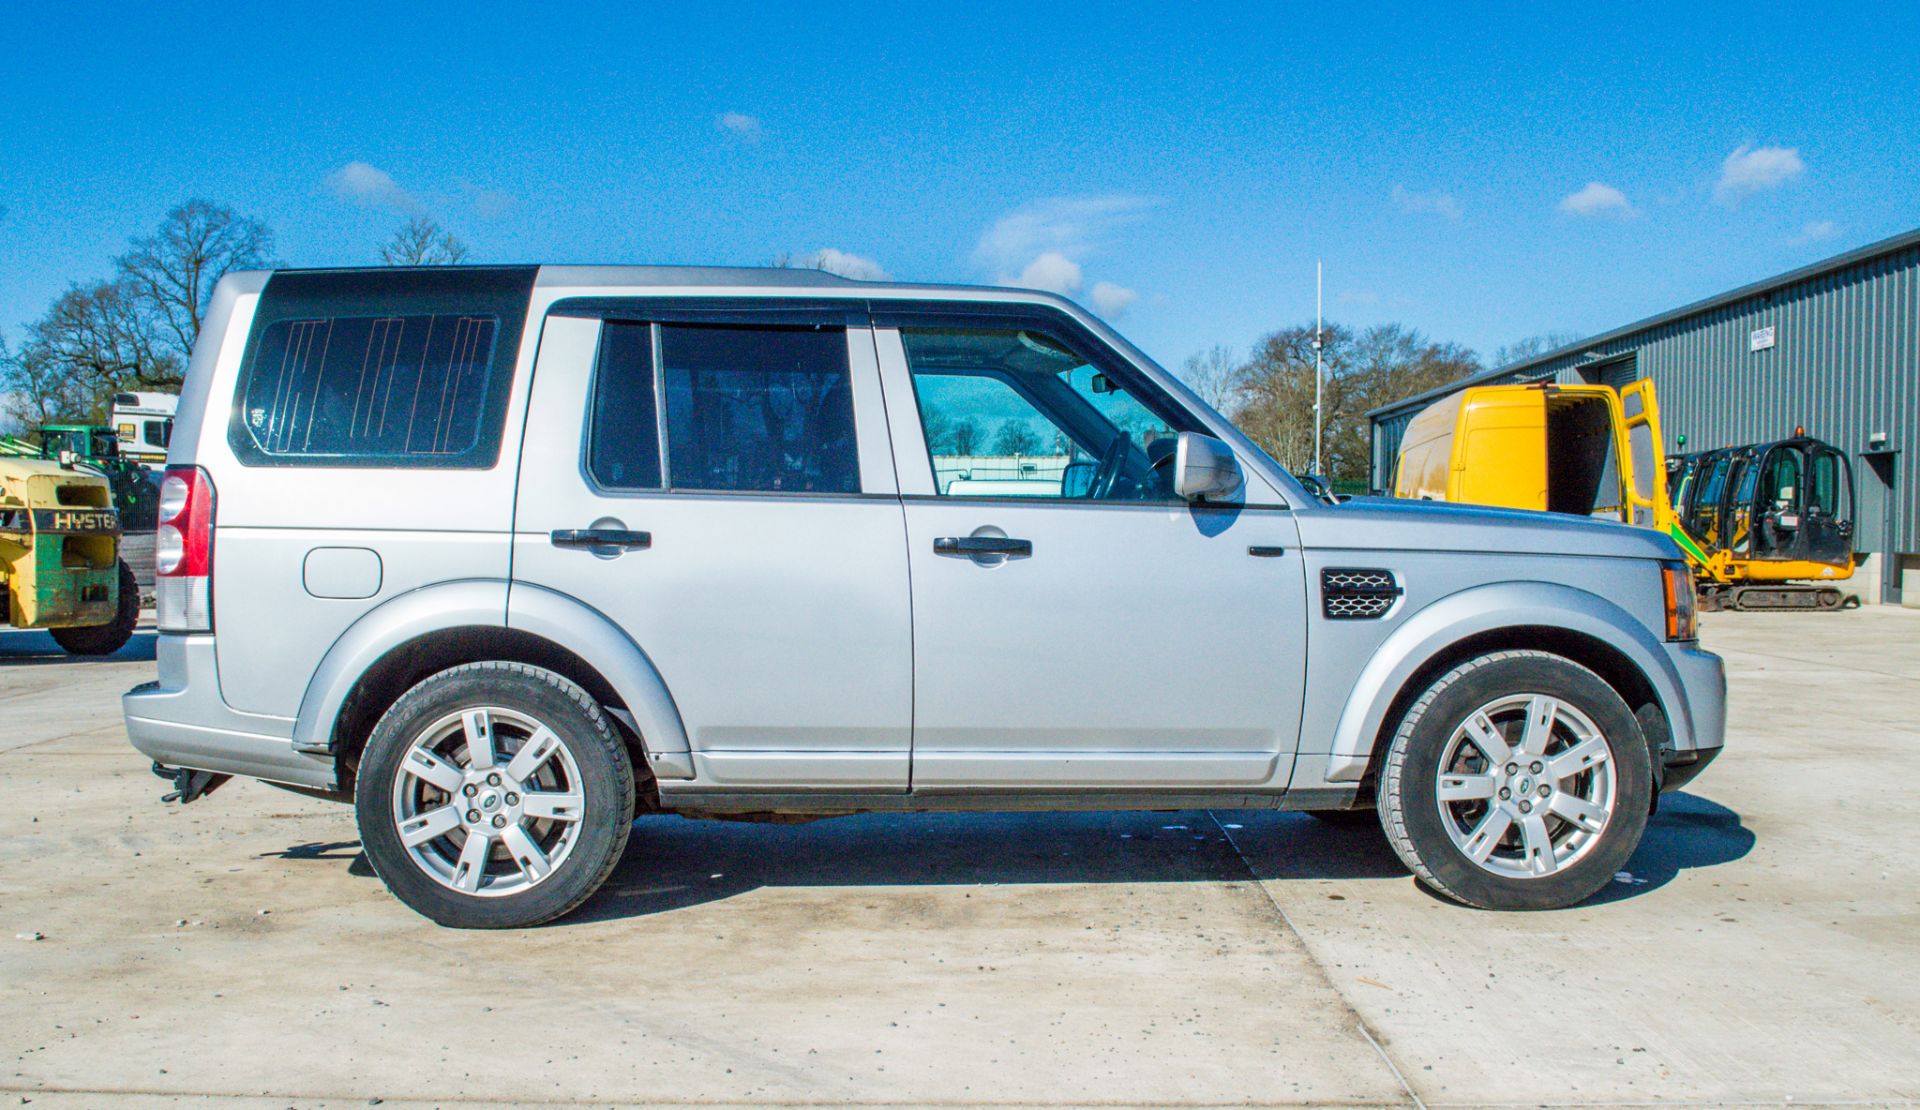 Land Rover Discovery 4 GS SDV6 3.0 diesel automatic estate car - Image 7 of 30